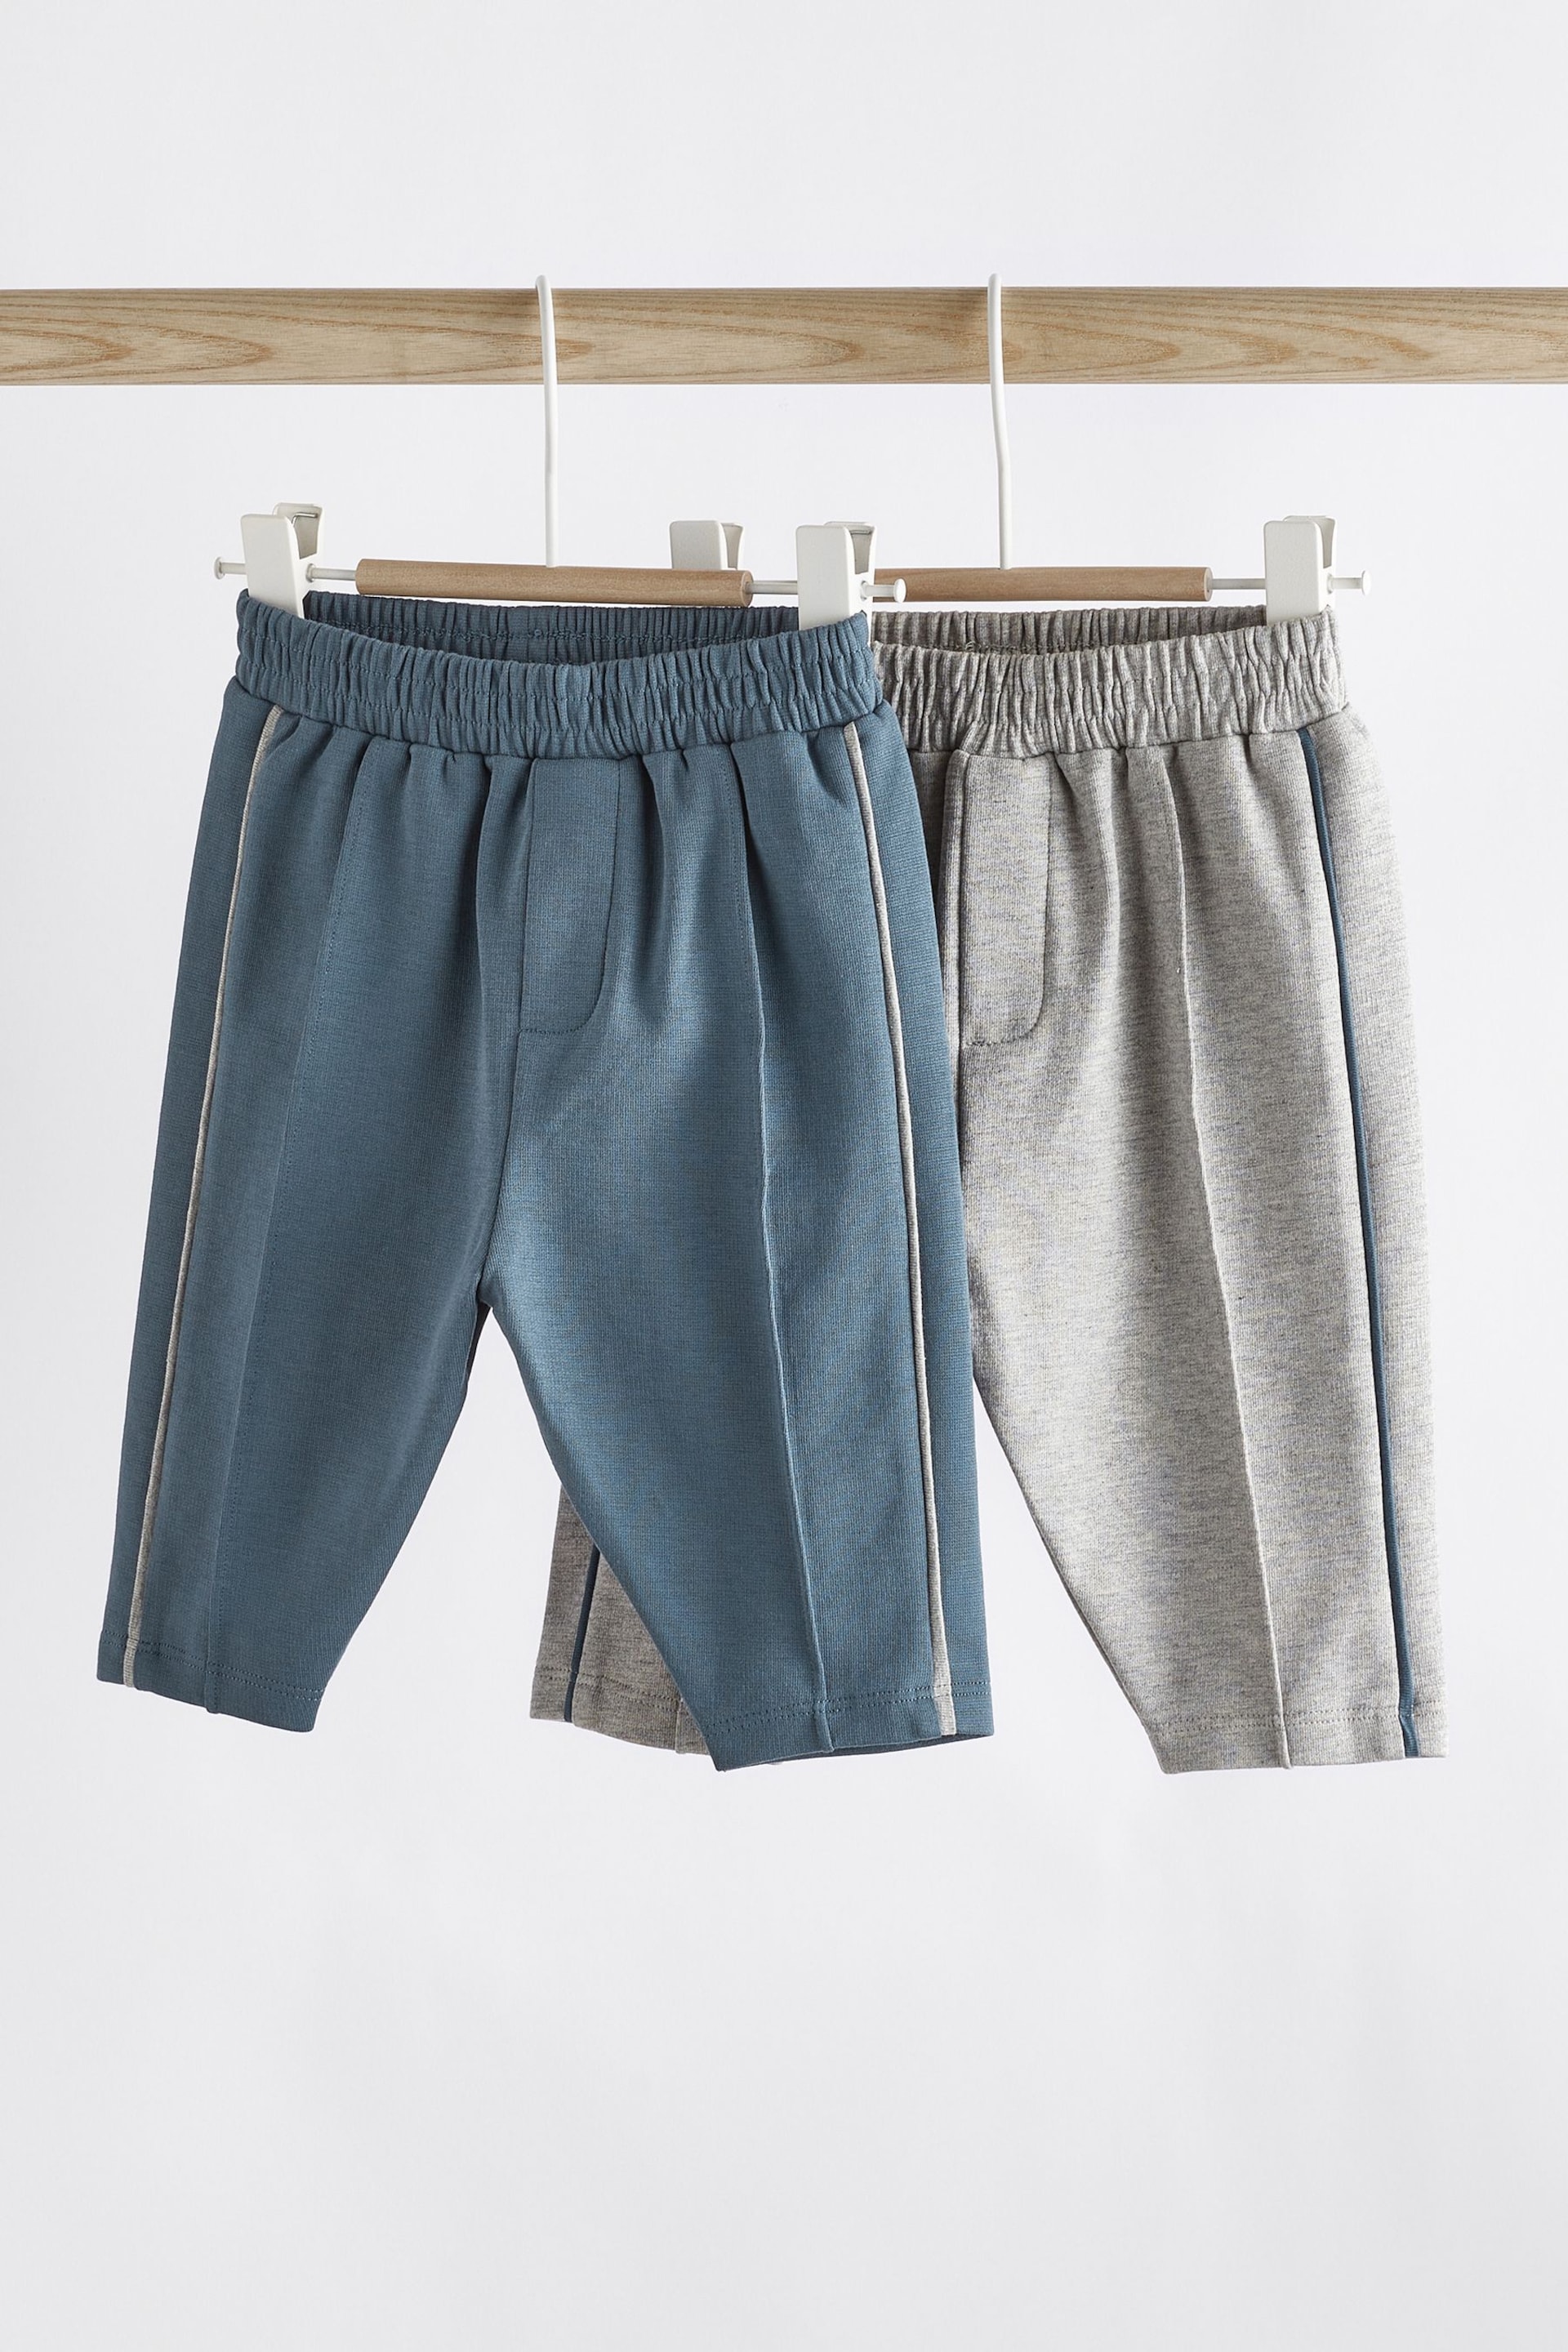 Grey Baby Smart Joggers 2 Pack - Image 1 of 6